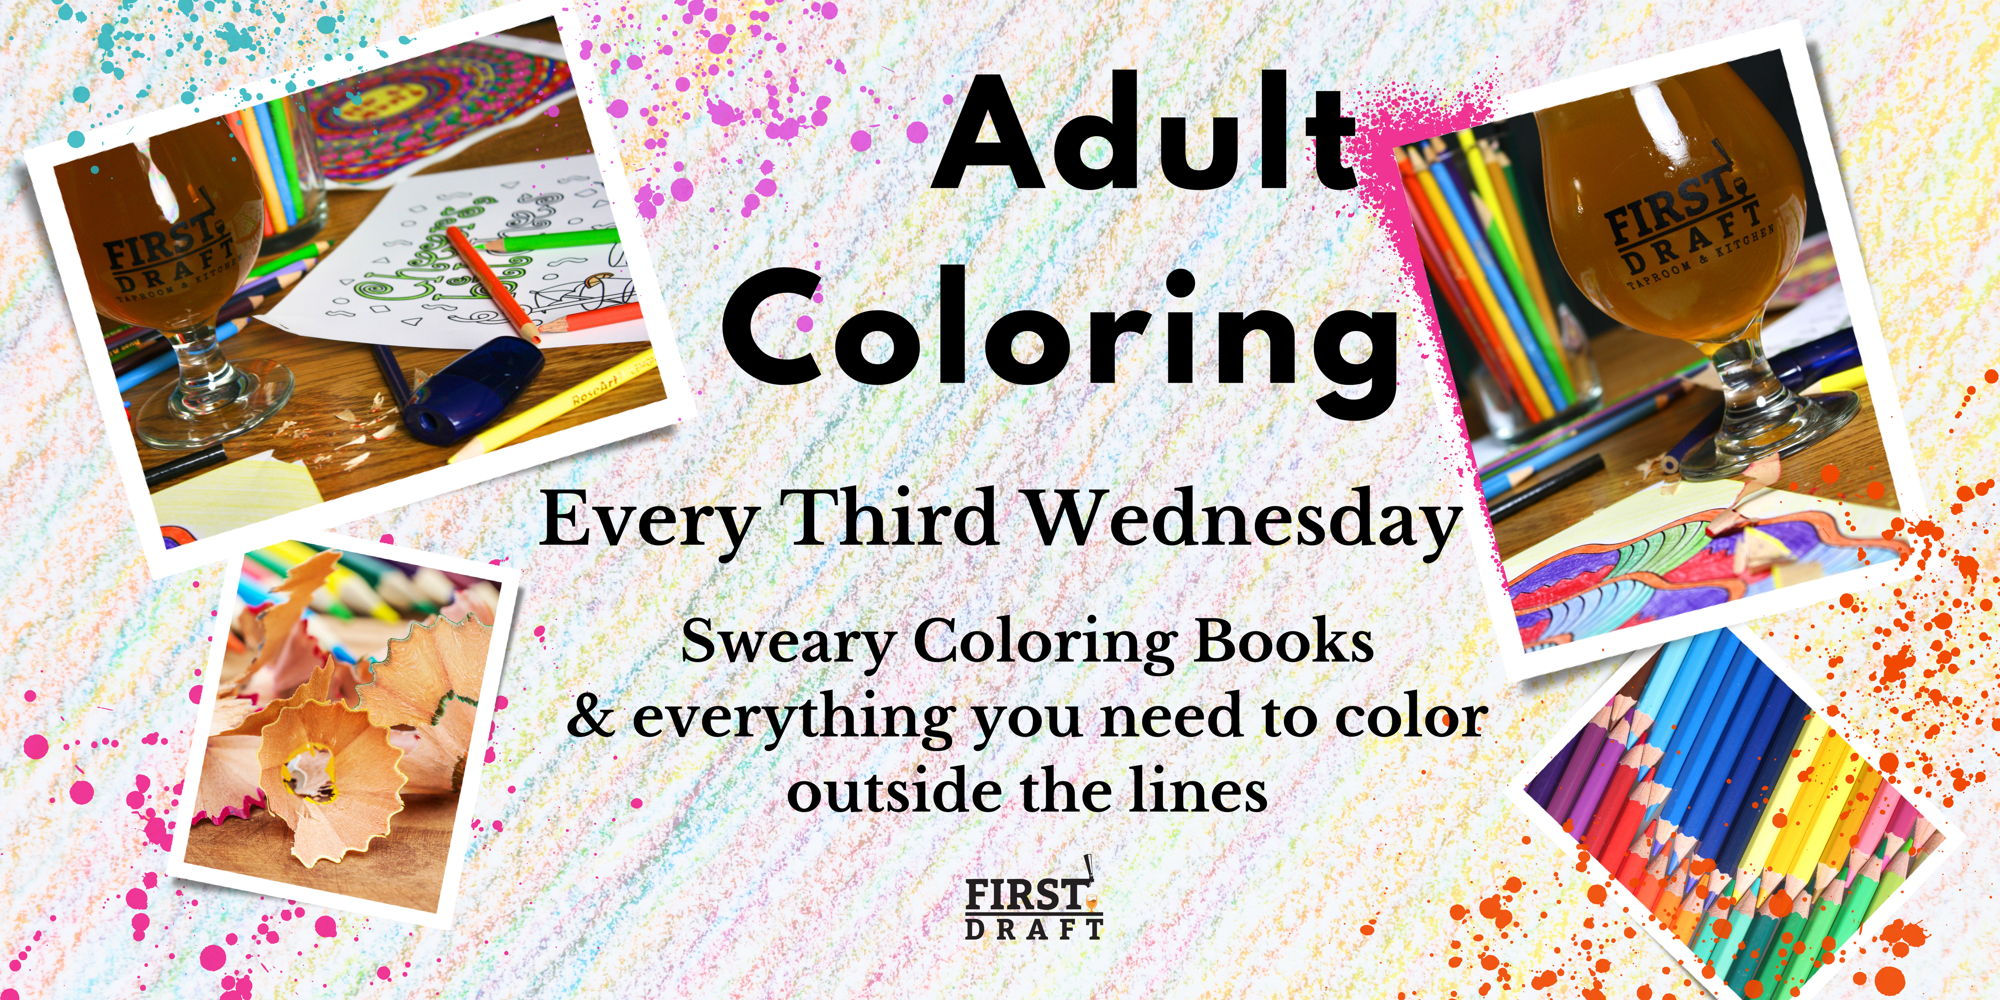 Adult Coloring promotional image